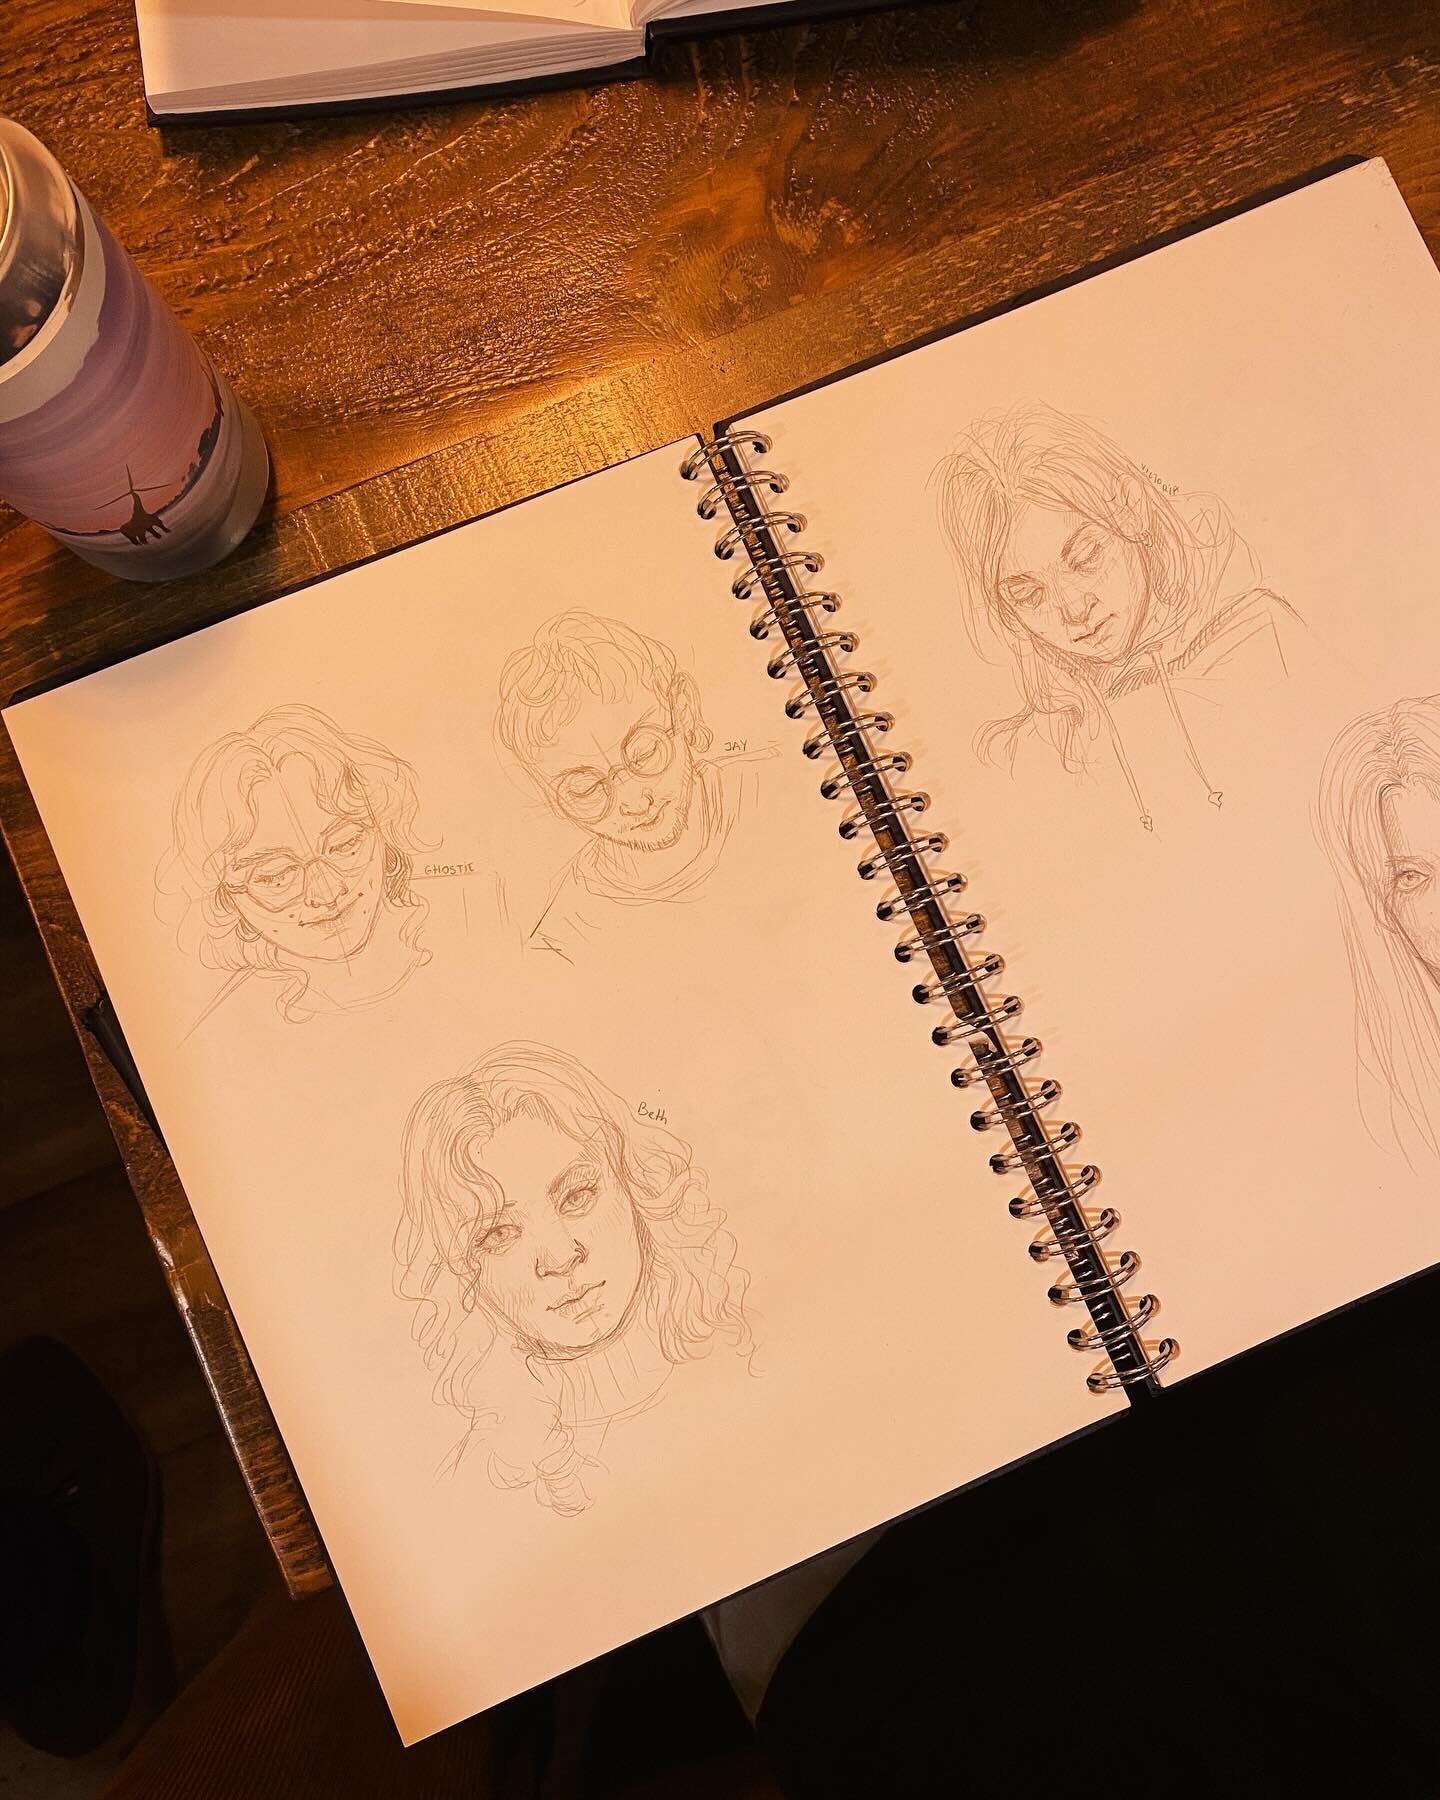 More portraits from last night at @theyard_ely ✏️

Thanks to all who joined us for our speed portraiture session! Drop us a DM to let us know what other events you&rsquo;d like to see from us this year&hellip;

#sketchandsocial #camcreates #cambridge